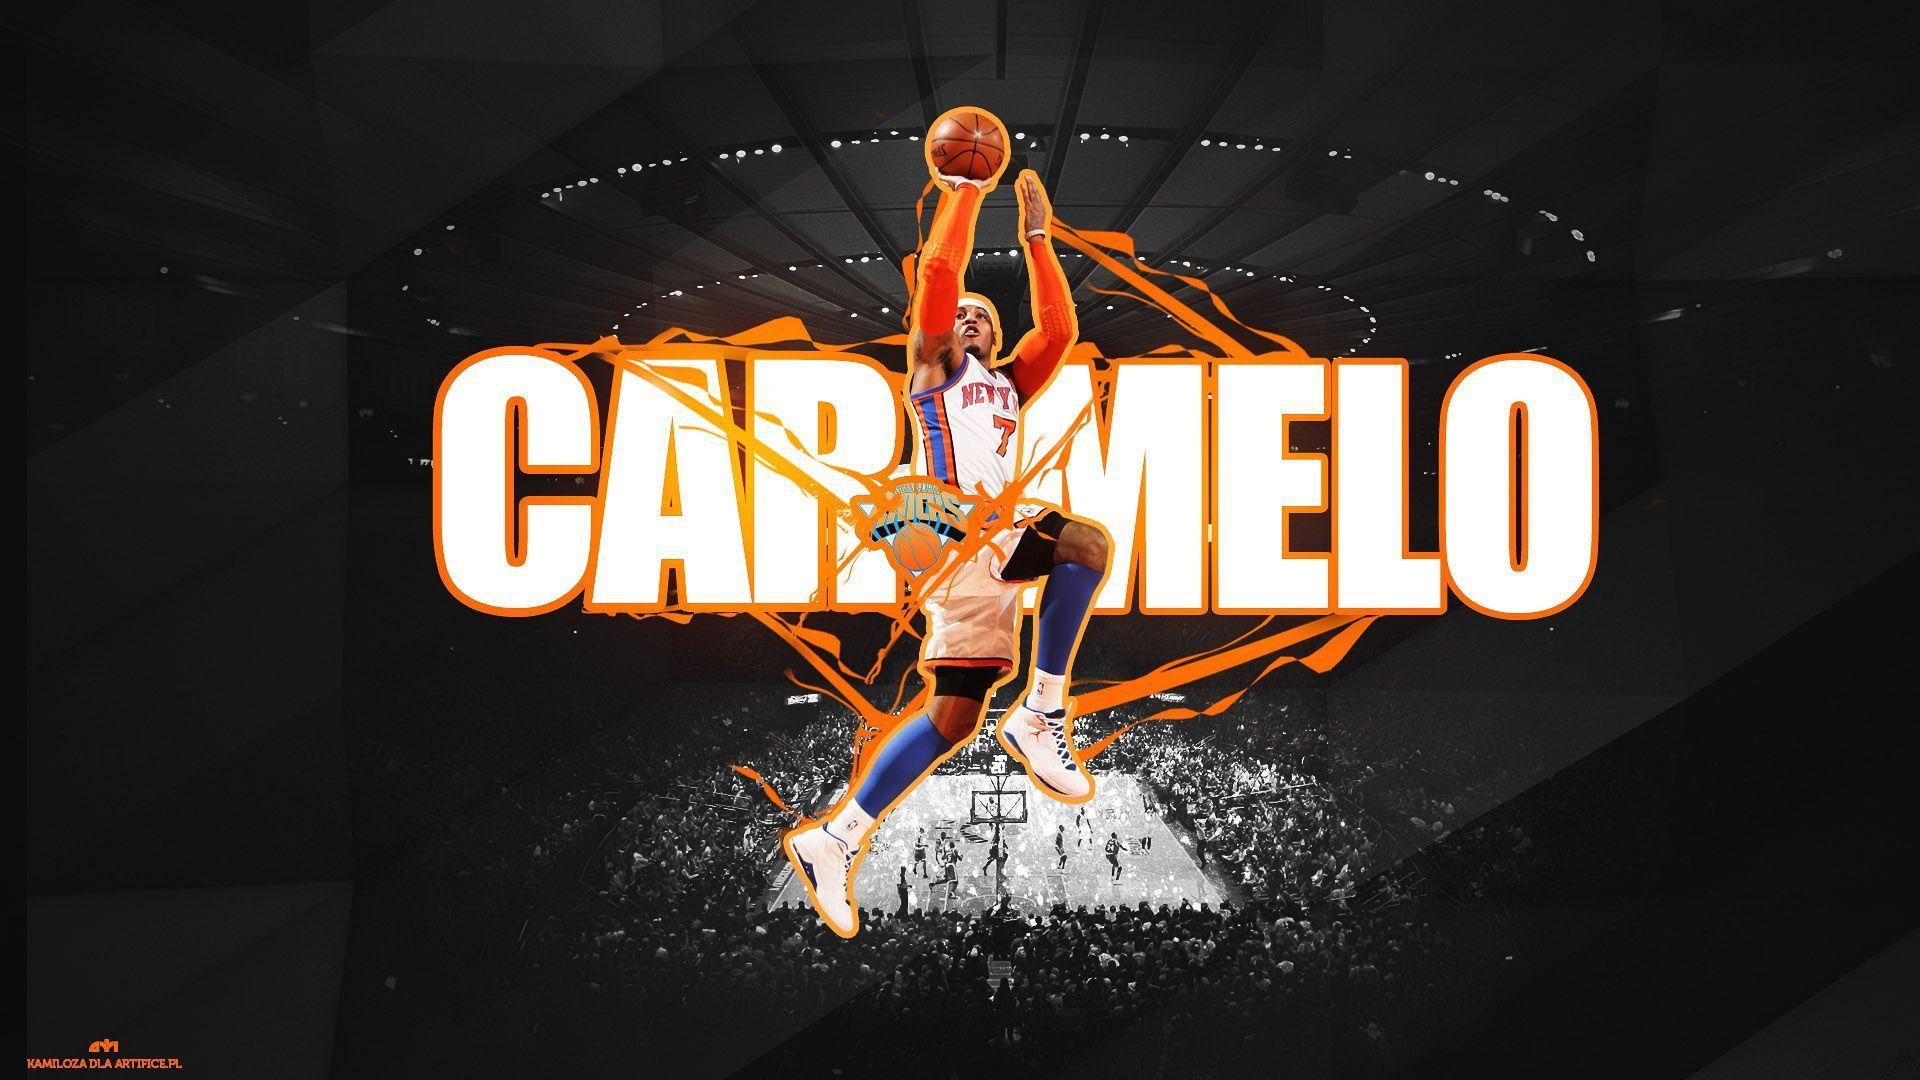 Carmelo Anthony 2015 New York Knicks NBA Wallpaper Wide or HD